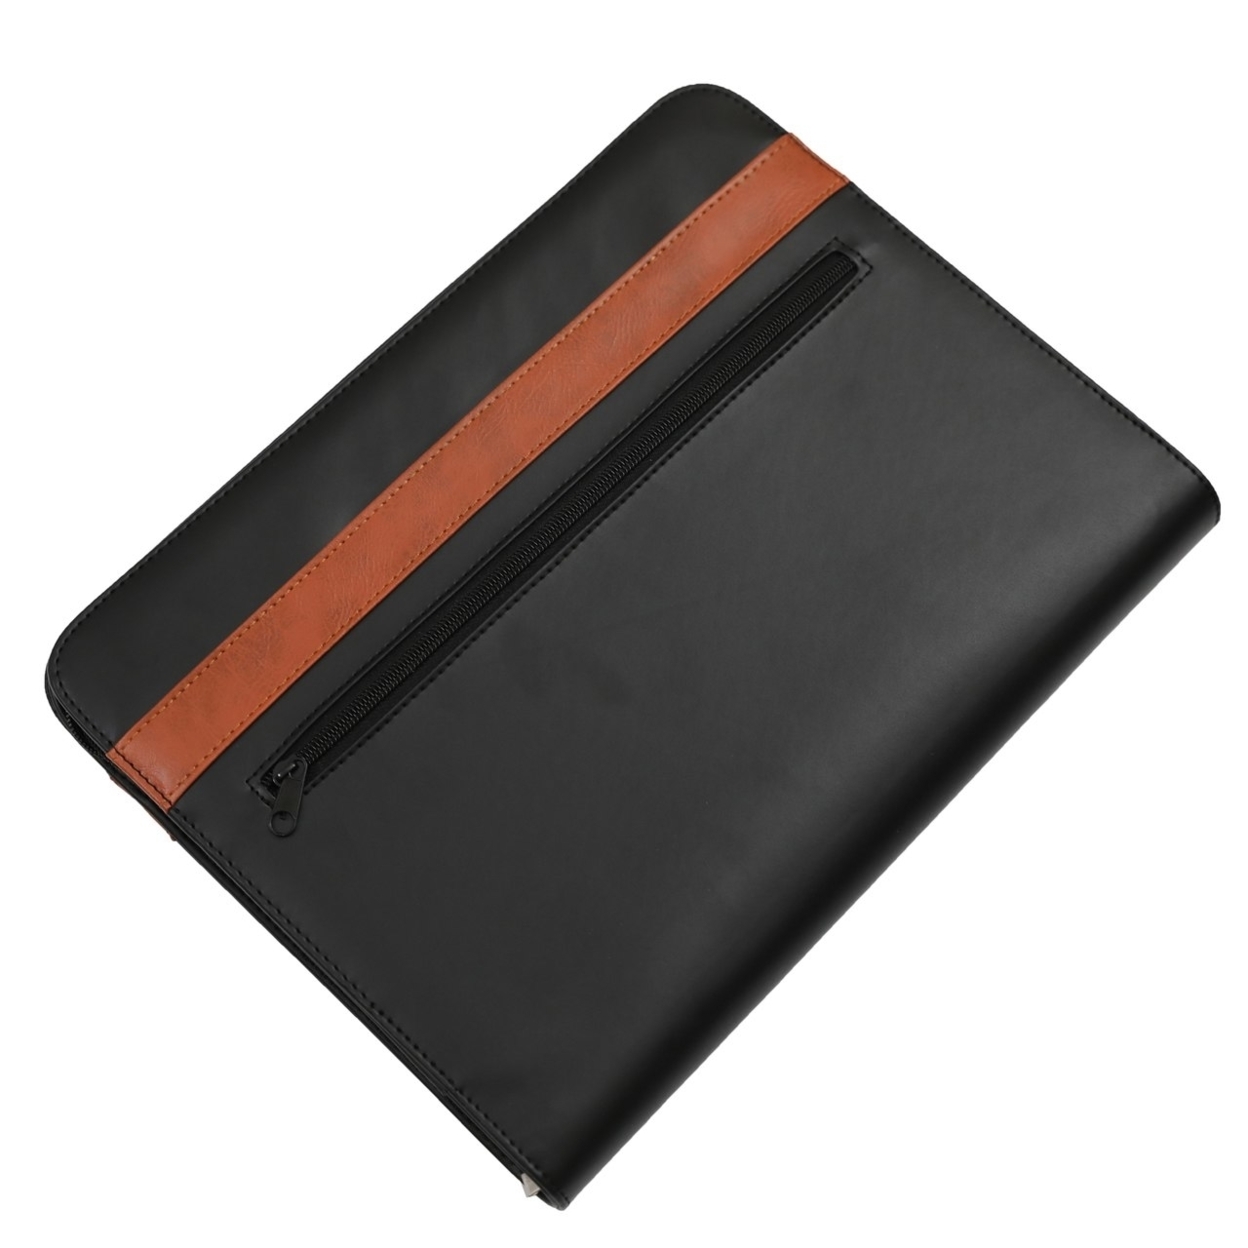 Black Leather Business Portfolio With Handles, Includes Large Notepad And Tablet Sleeve